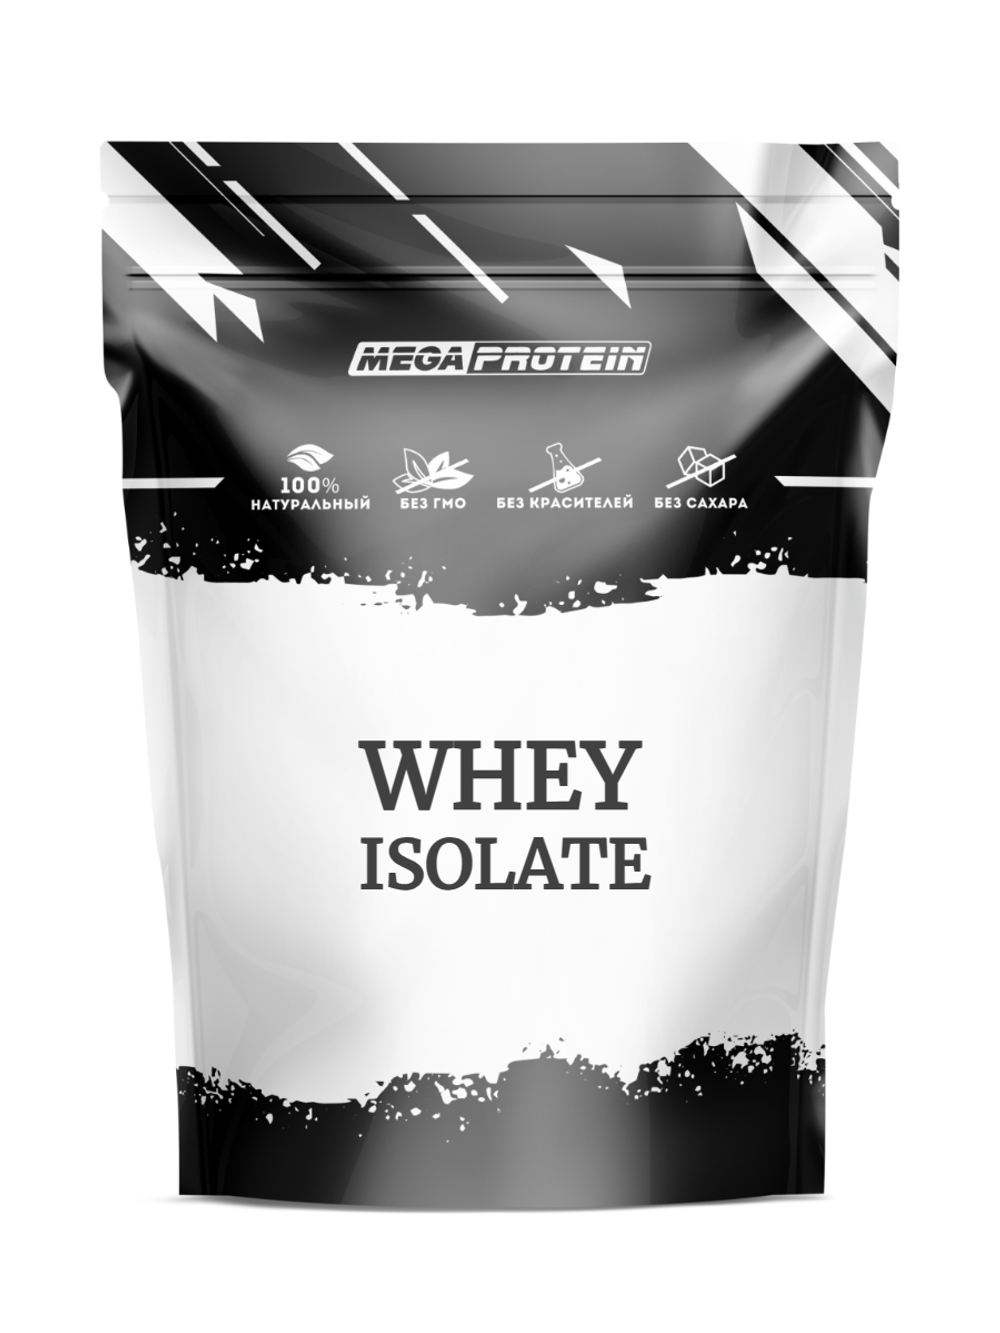 WHEY ISOLATE (MegaProtein ST)